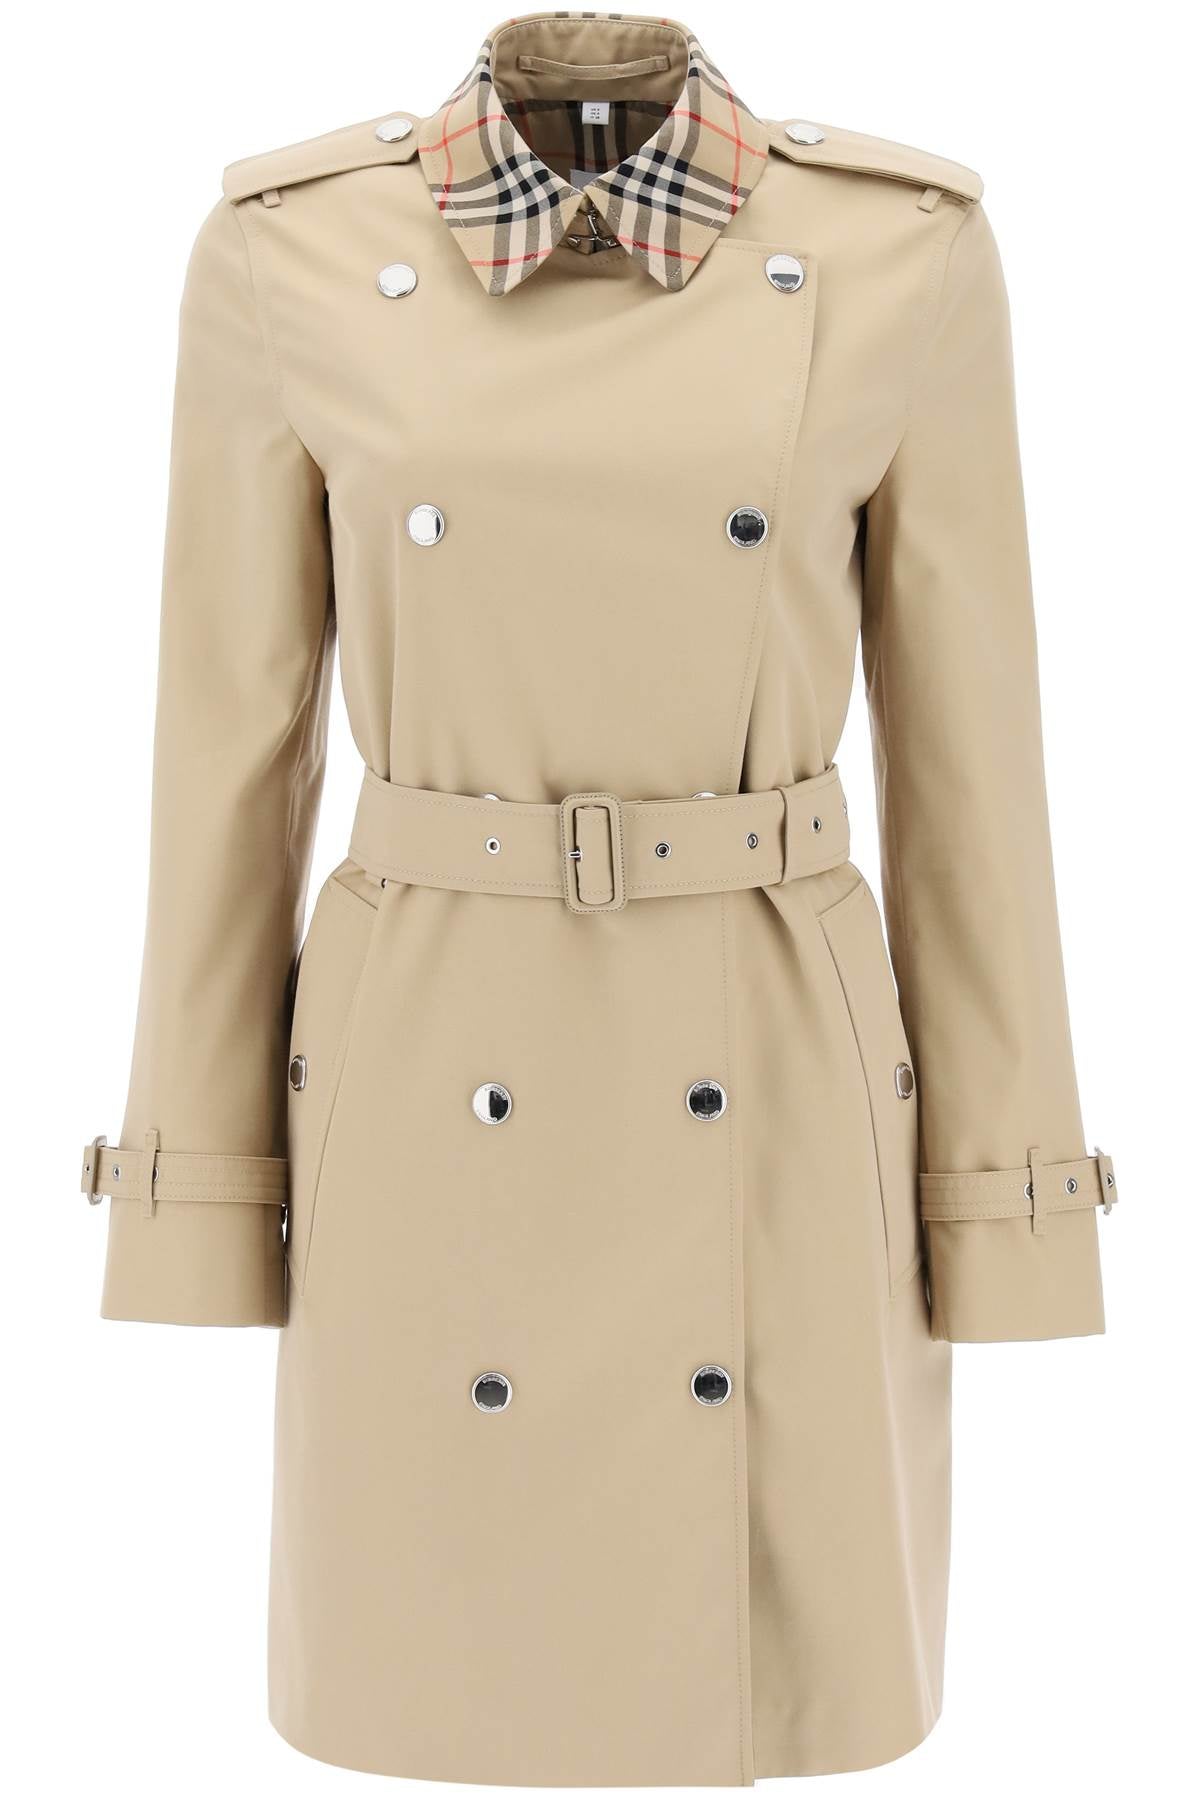 Burberry montrose double-breasted trench coat – Italy Station